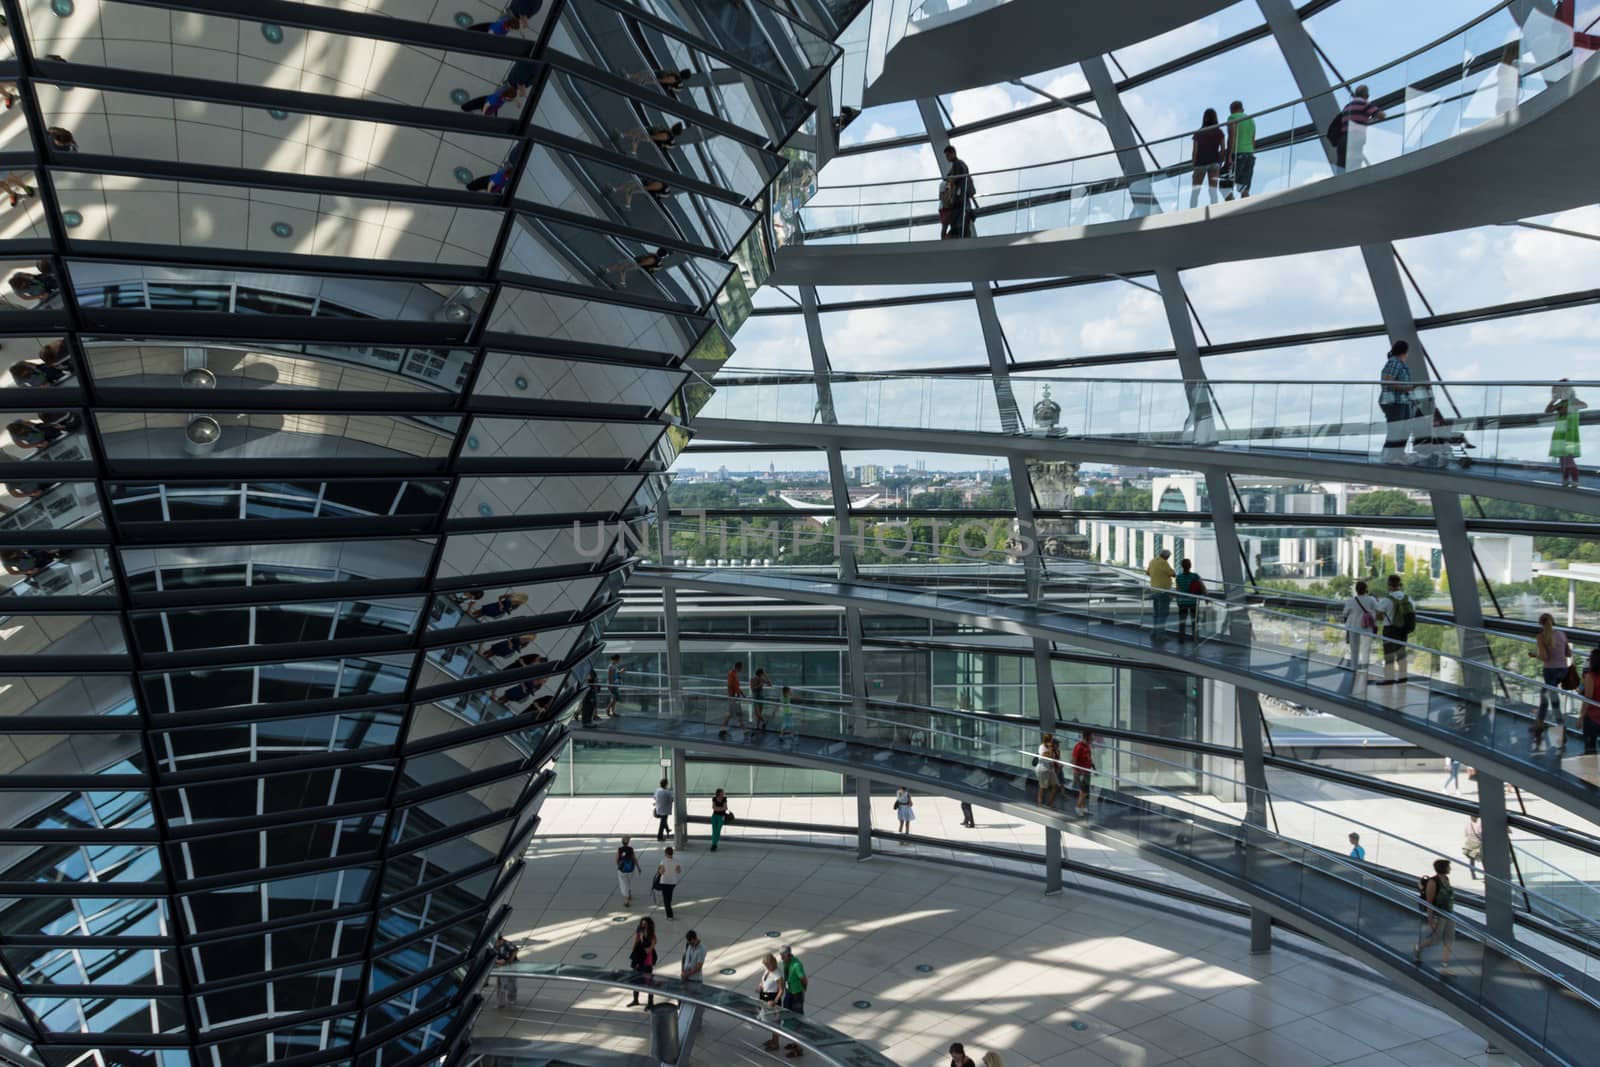 The Reichstag in Berlin with the German Bundestag and the famous glass dome